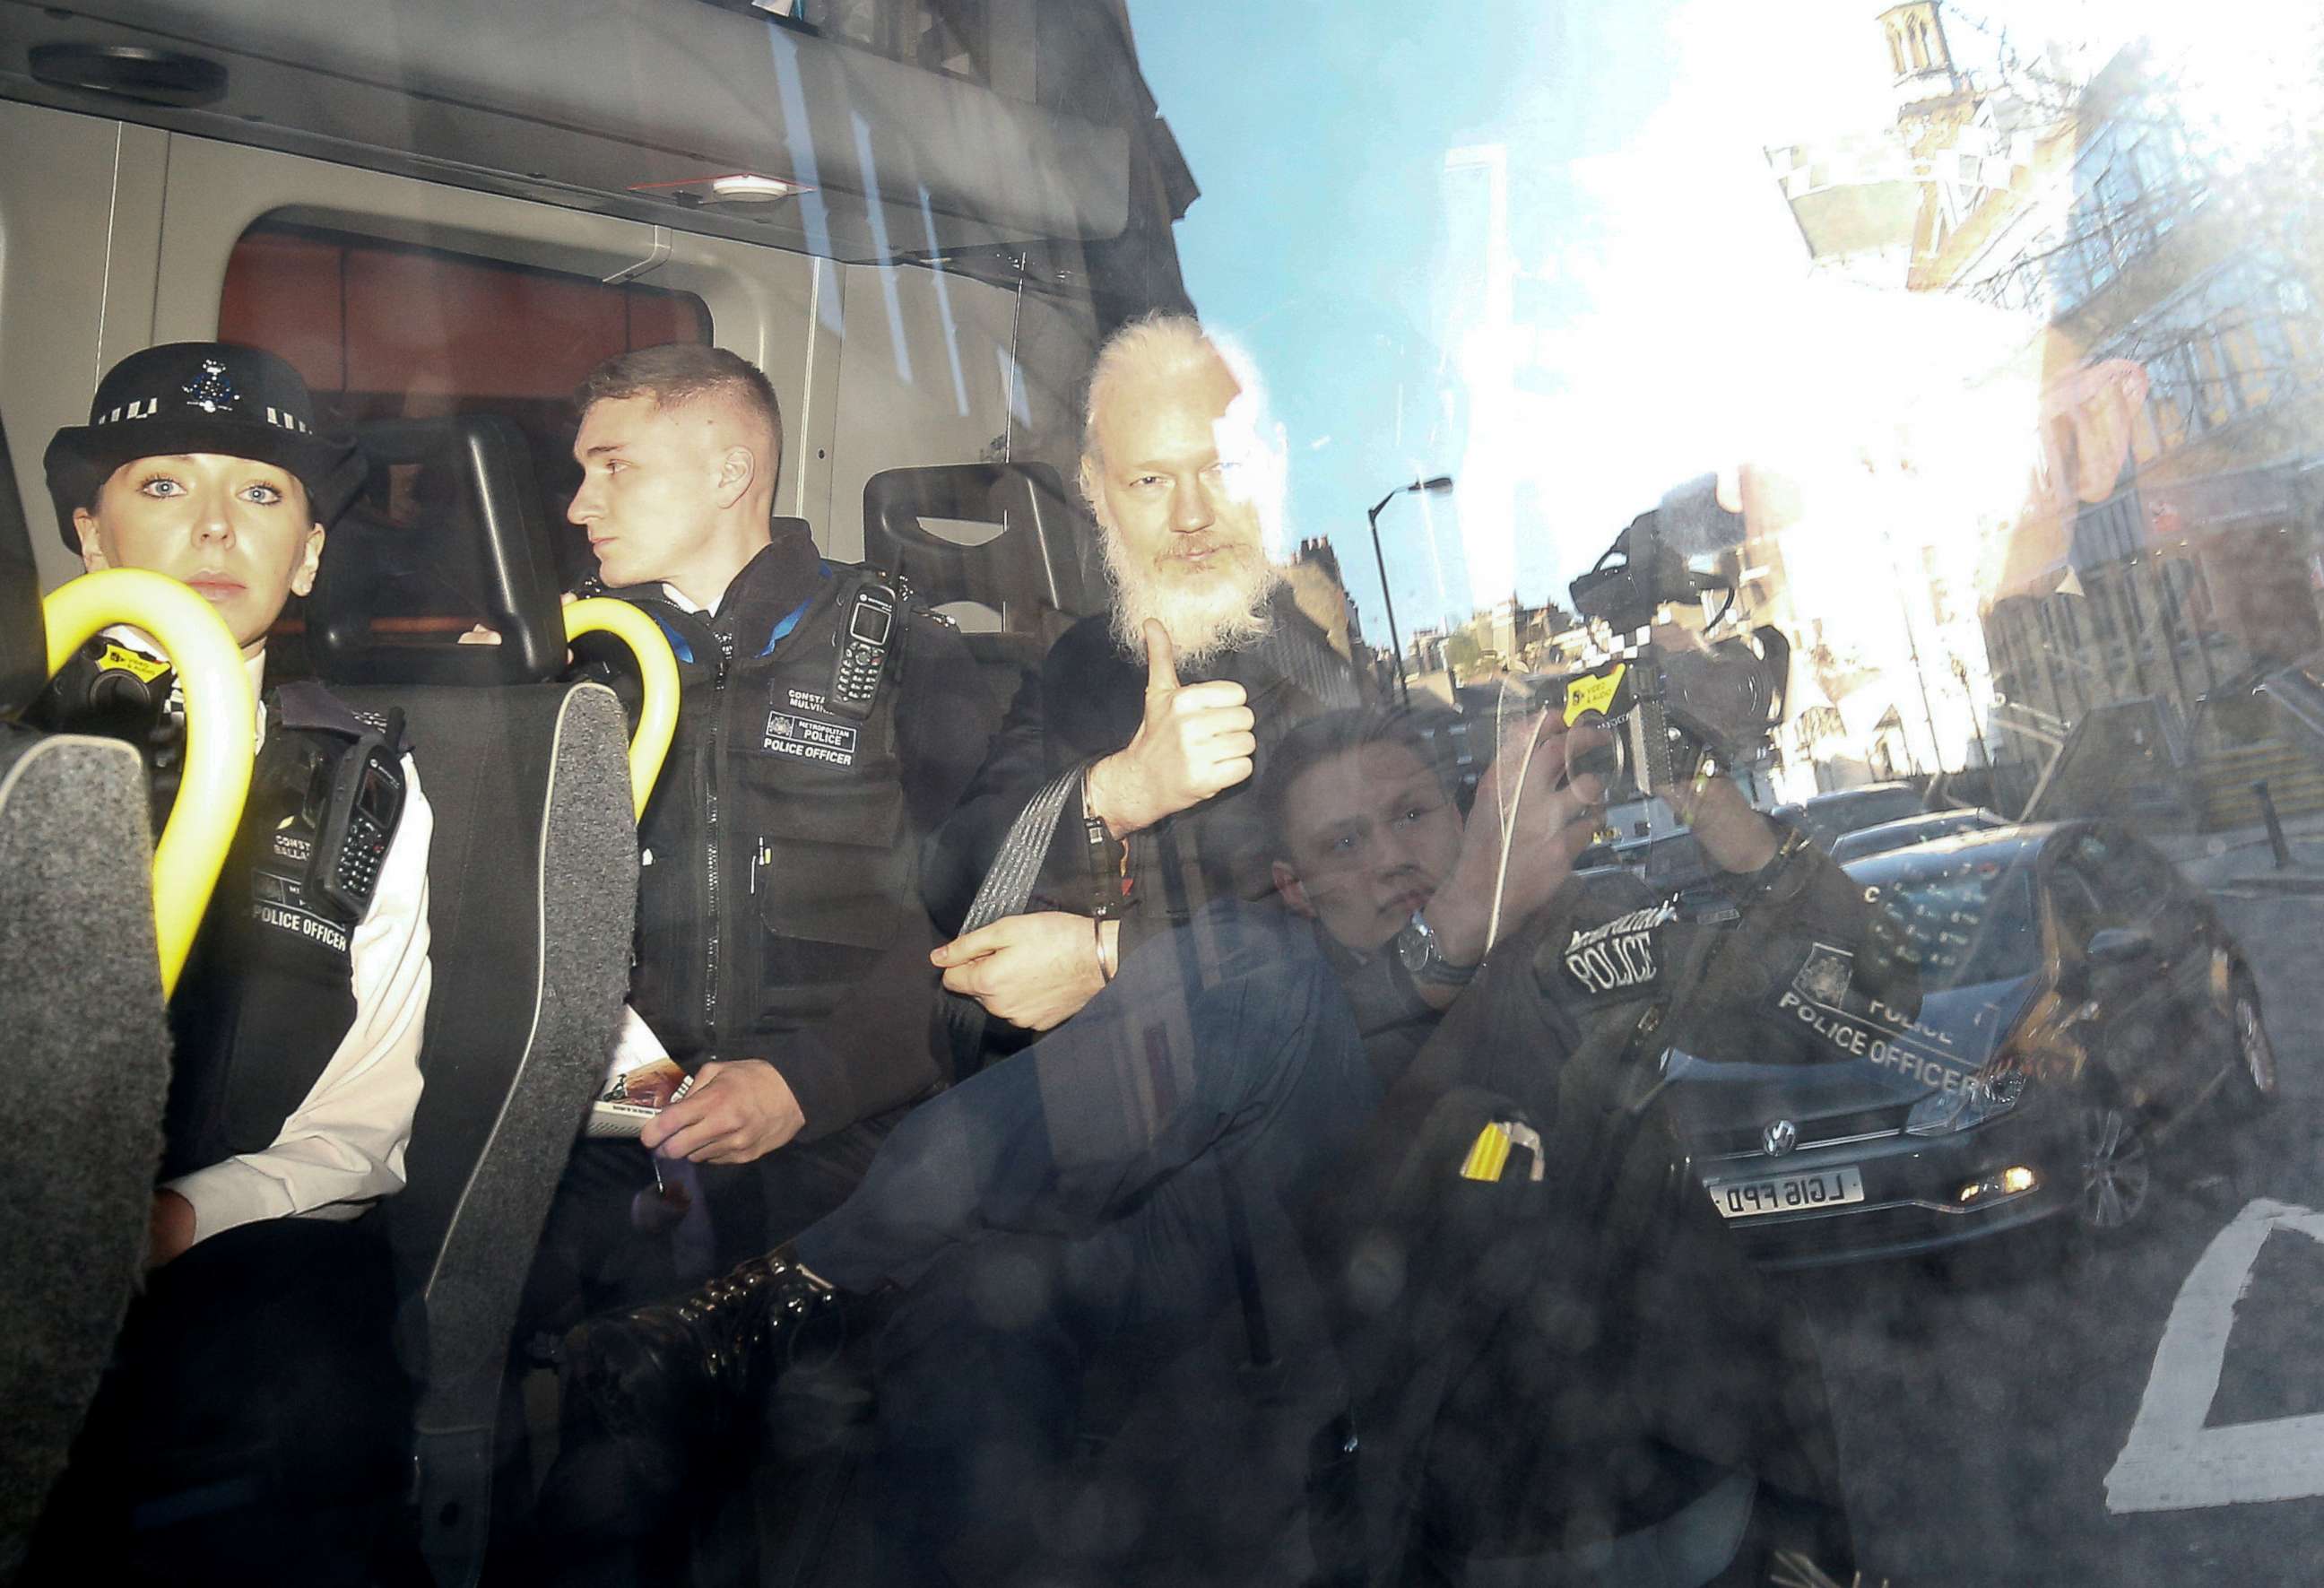 PHOTO: WikiLeaks founder Julian Assange gestures as he leaves the Westminster Magistrates Court in the police van, after he was arrested in London, April 11, 2019.